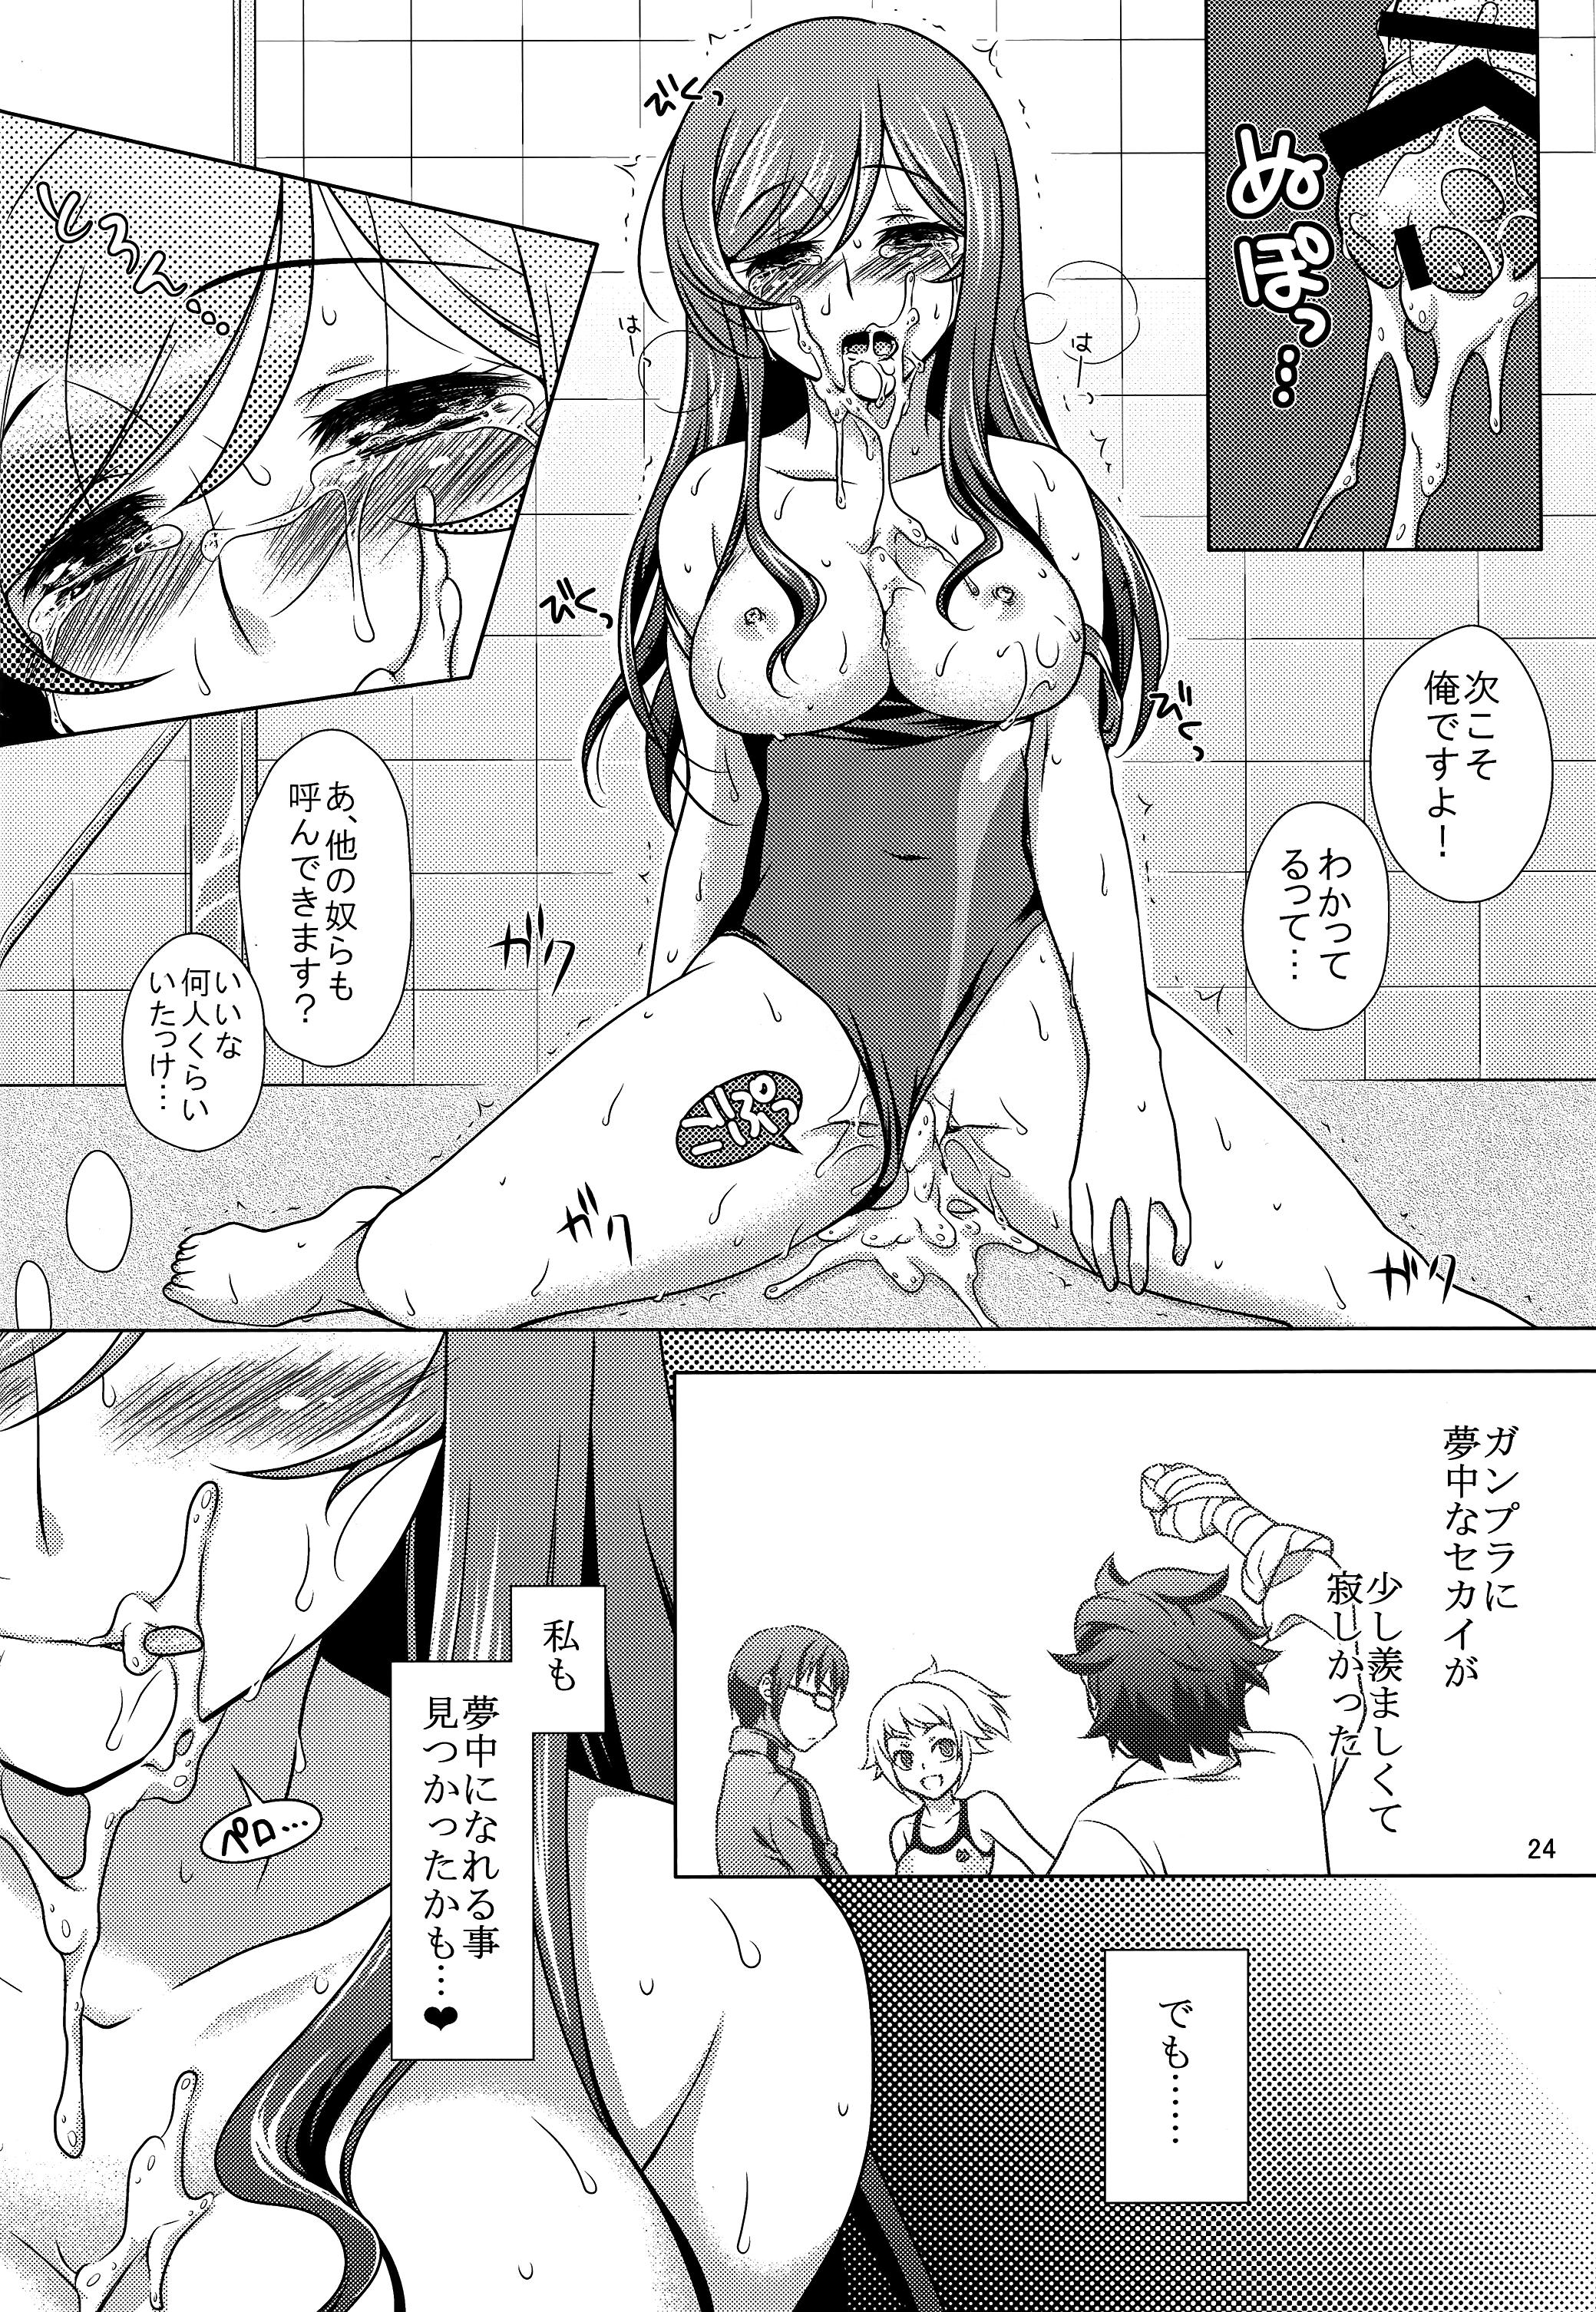 Pica FIELD?? POOLSIDE - Gundam build fighters try Hotwife - Page 24